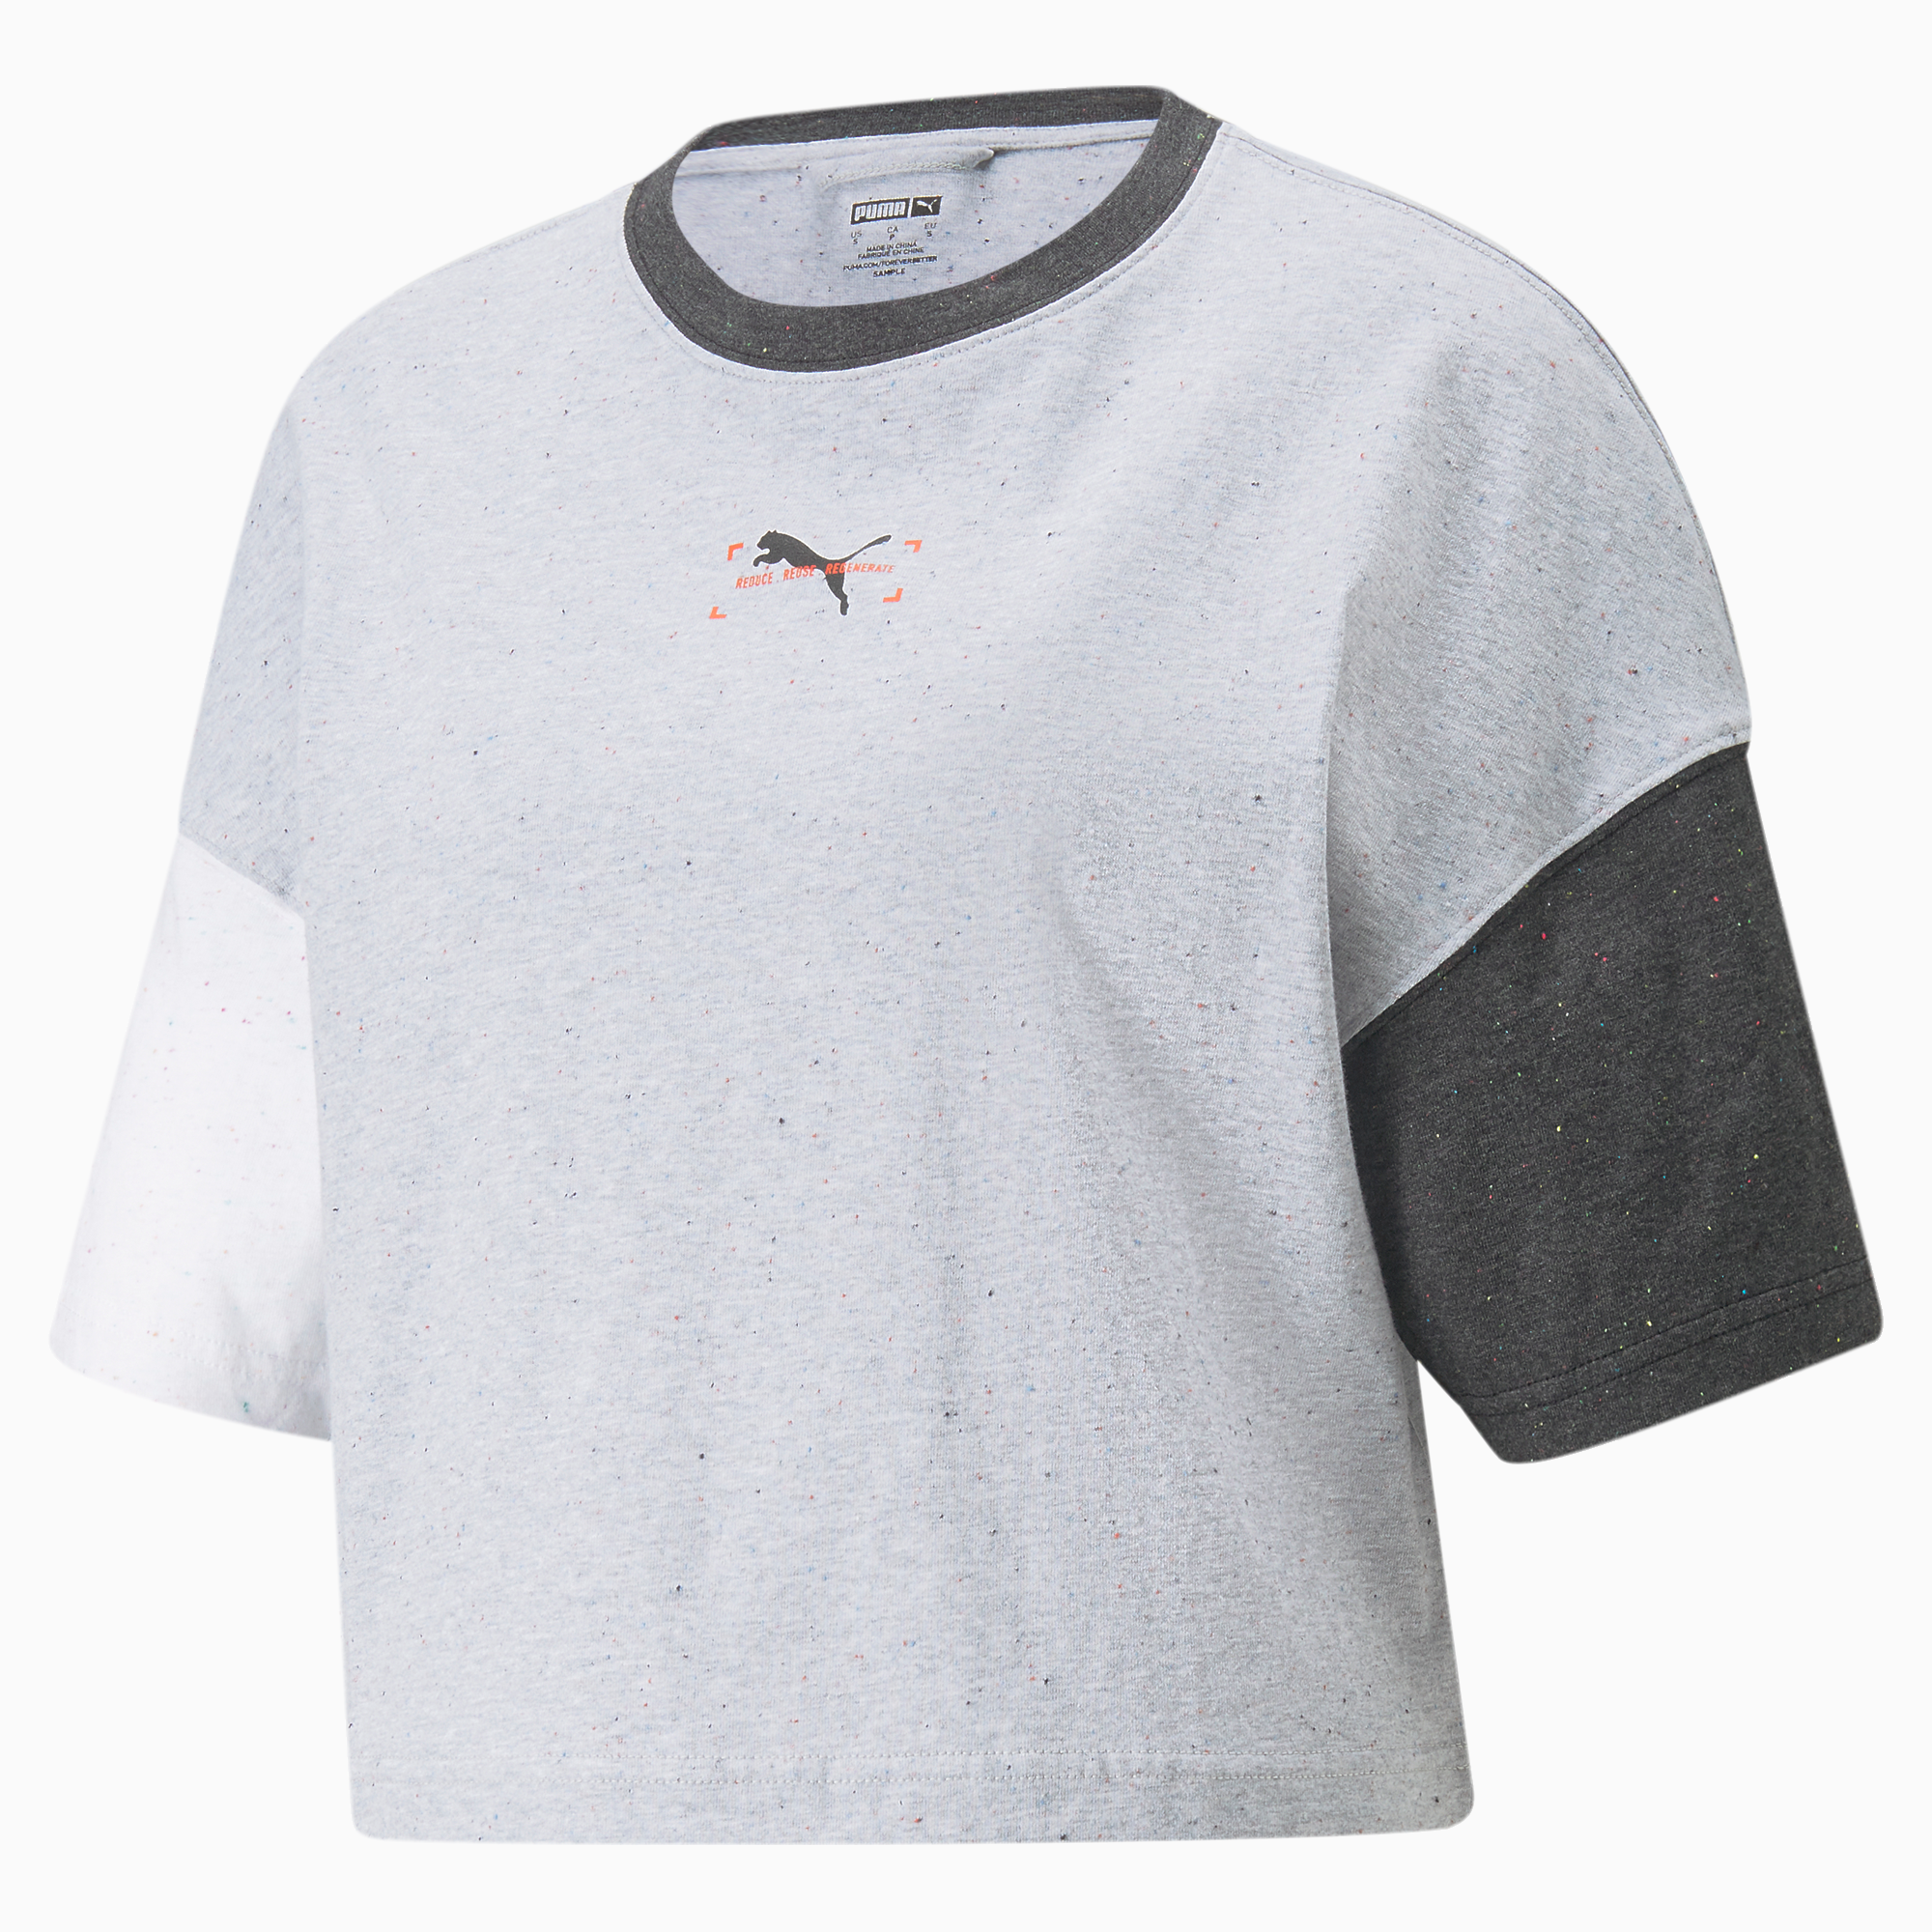 RE:Collection Oversized Women's Tee, Light Gray Heather